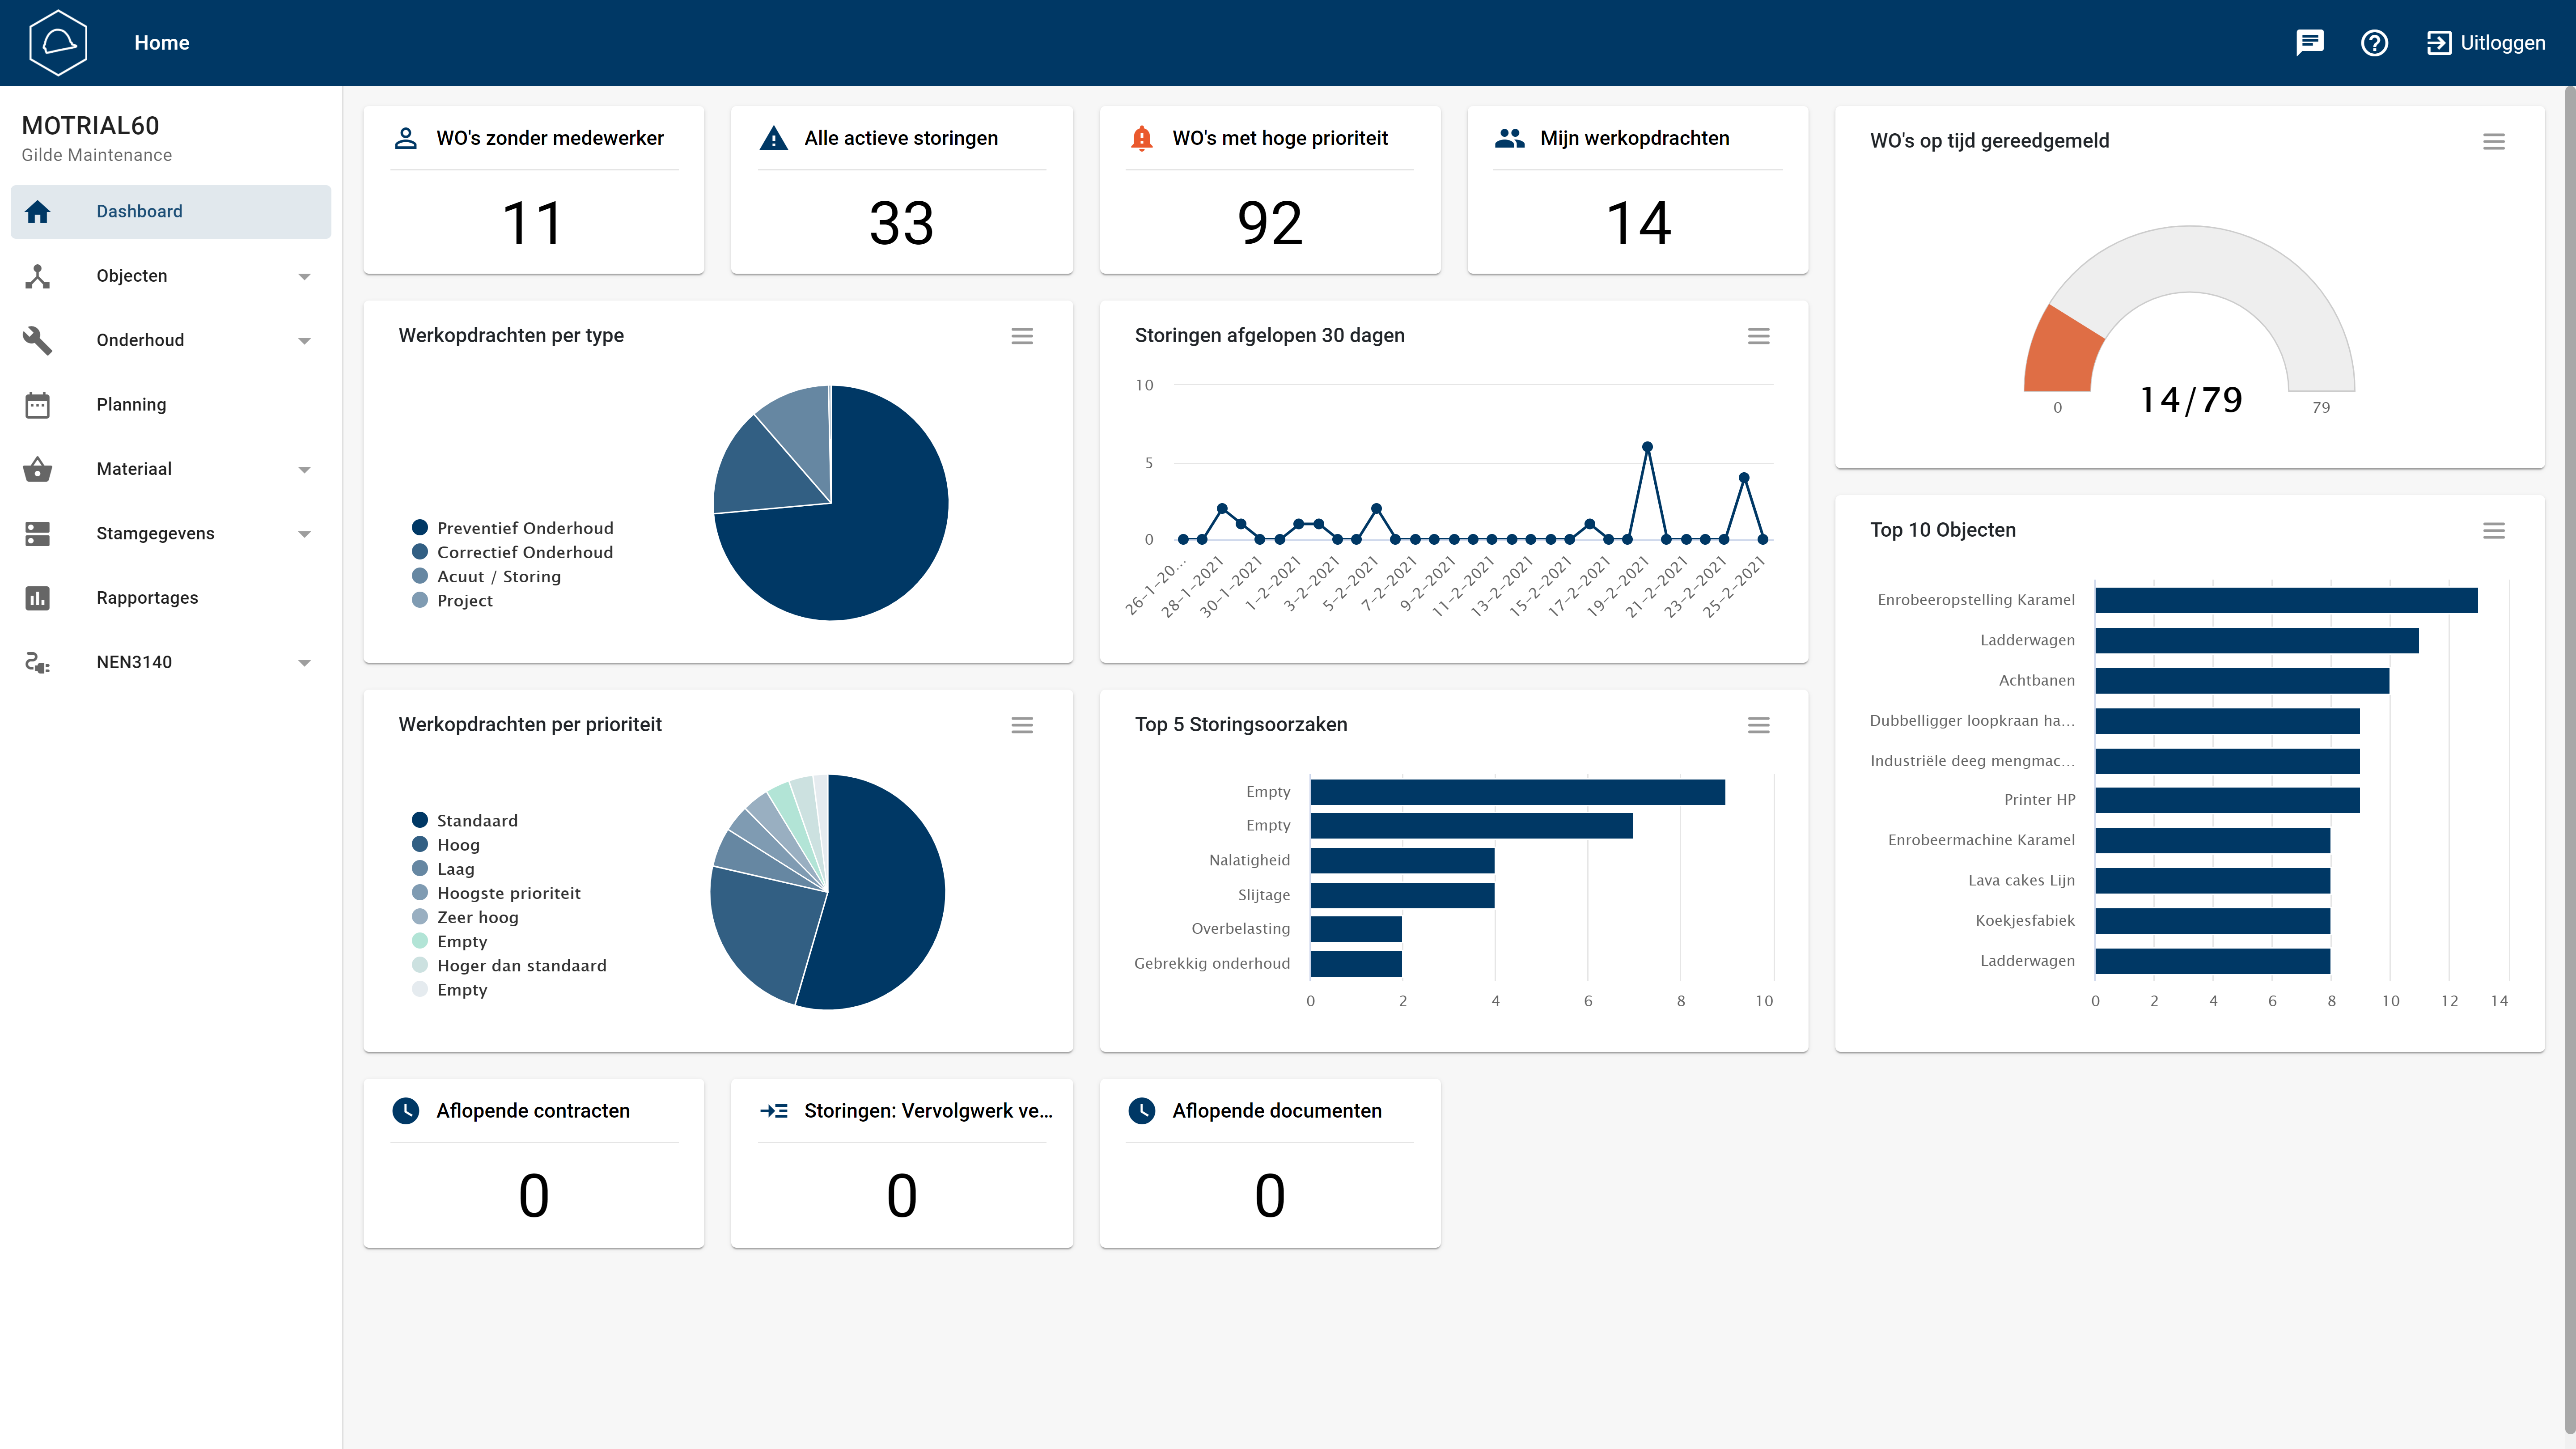 This is our McMain Online Dashboard. This dashboard gives you a visual overview of all the maintenance management-related data that's been added in McMain Online. Thanks to the dashboard, you always know what's going on.